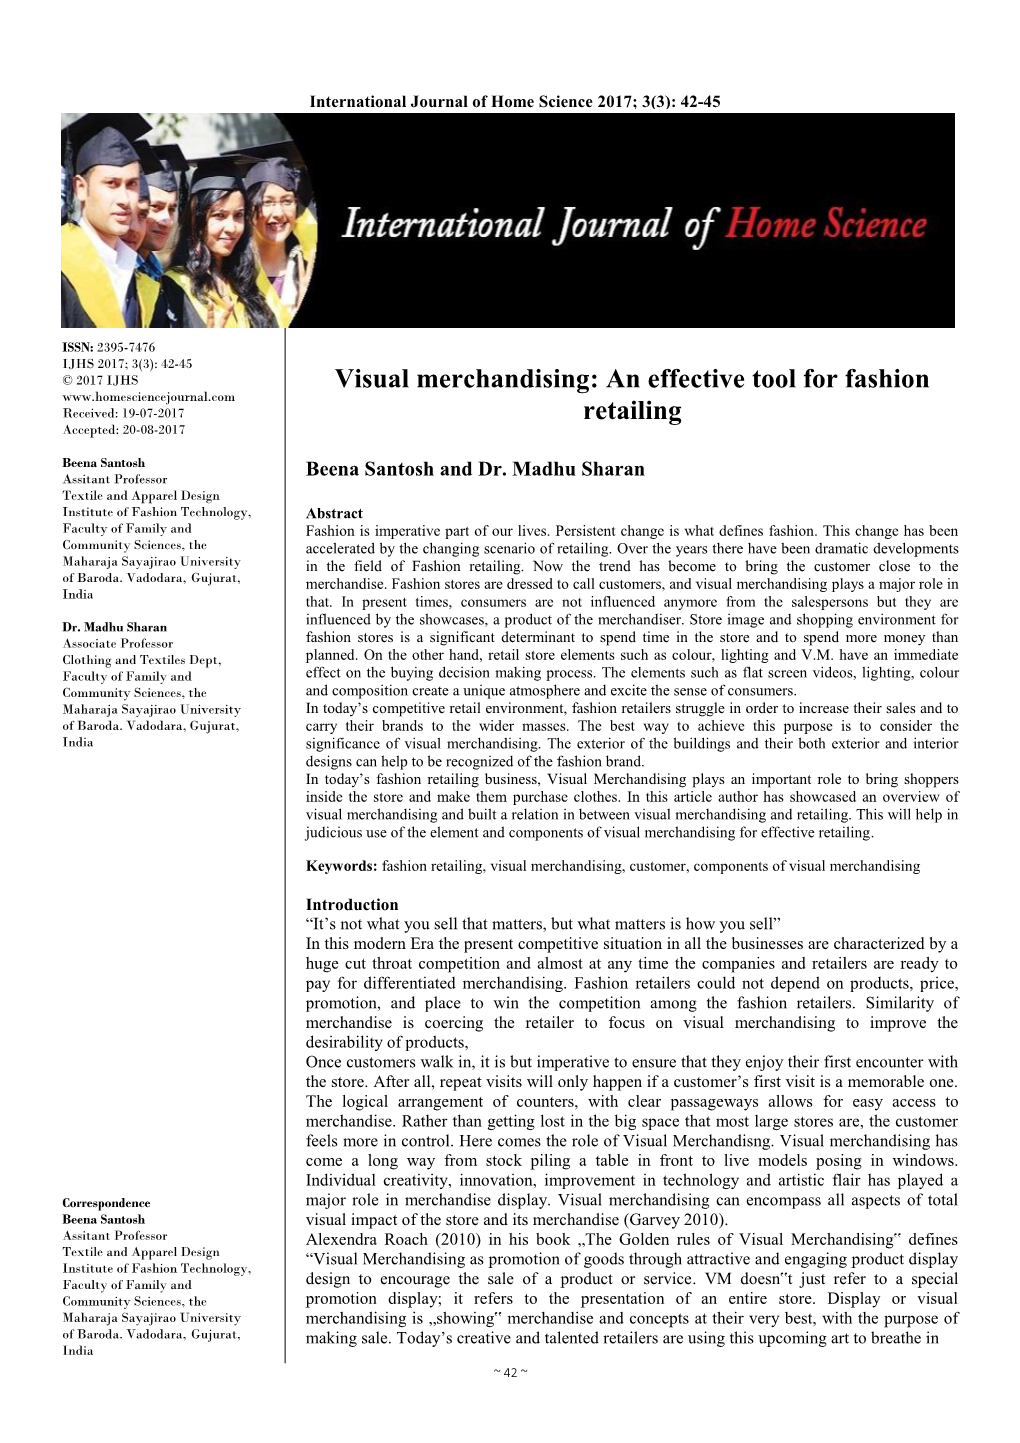 Visual Merchandising: an Effective Tool for Fashion Retailing